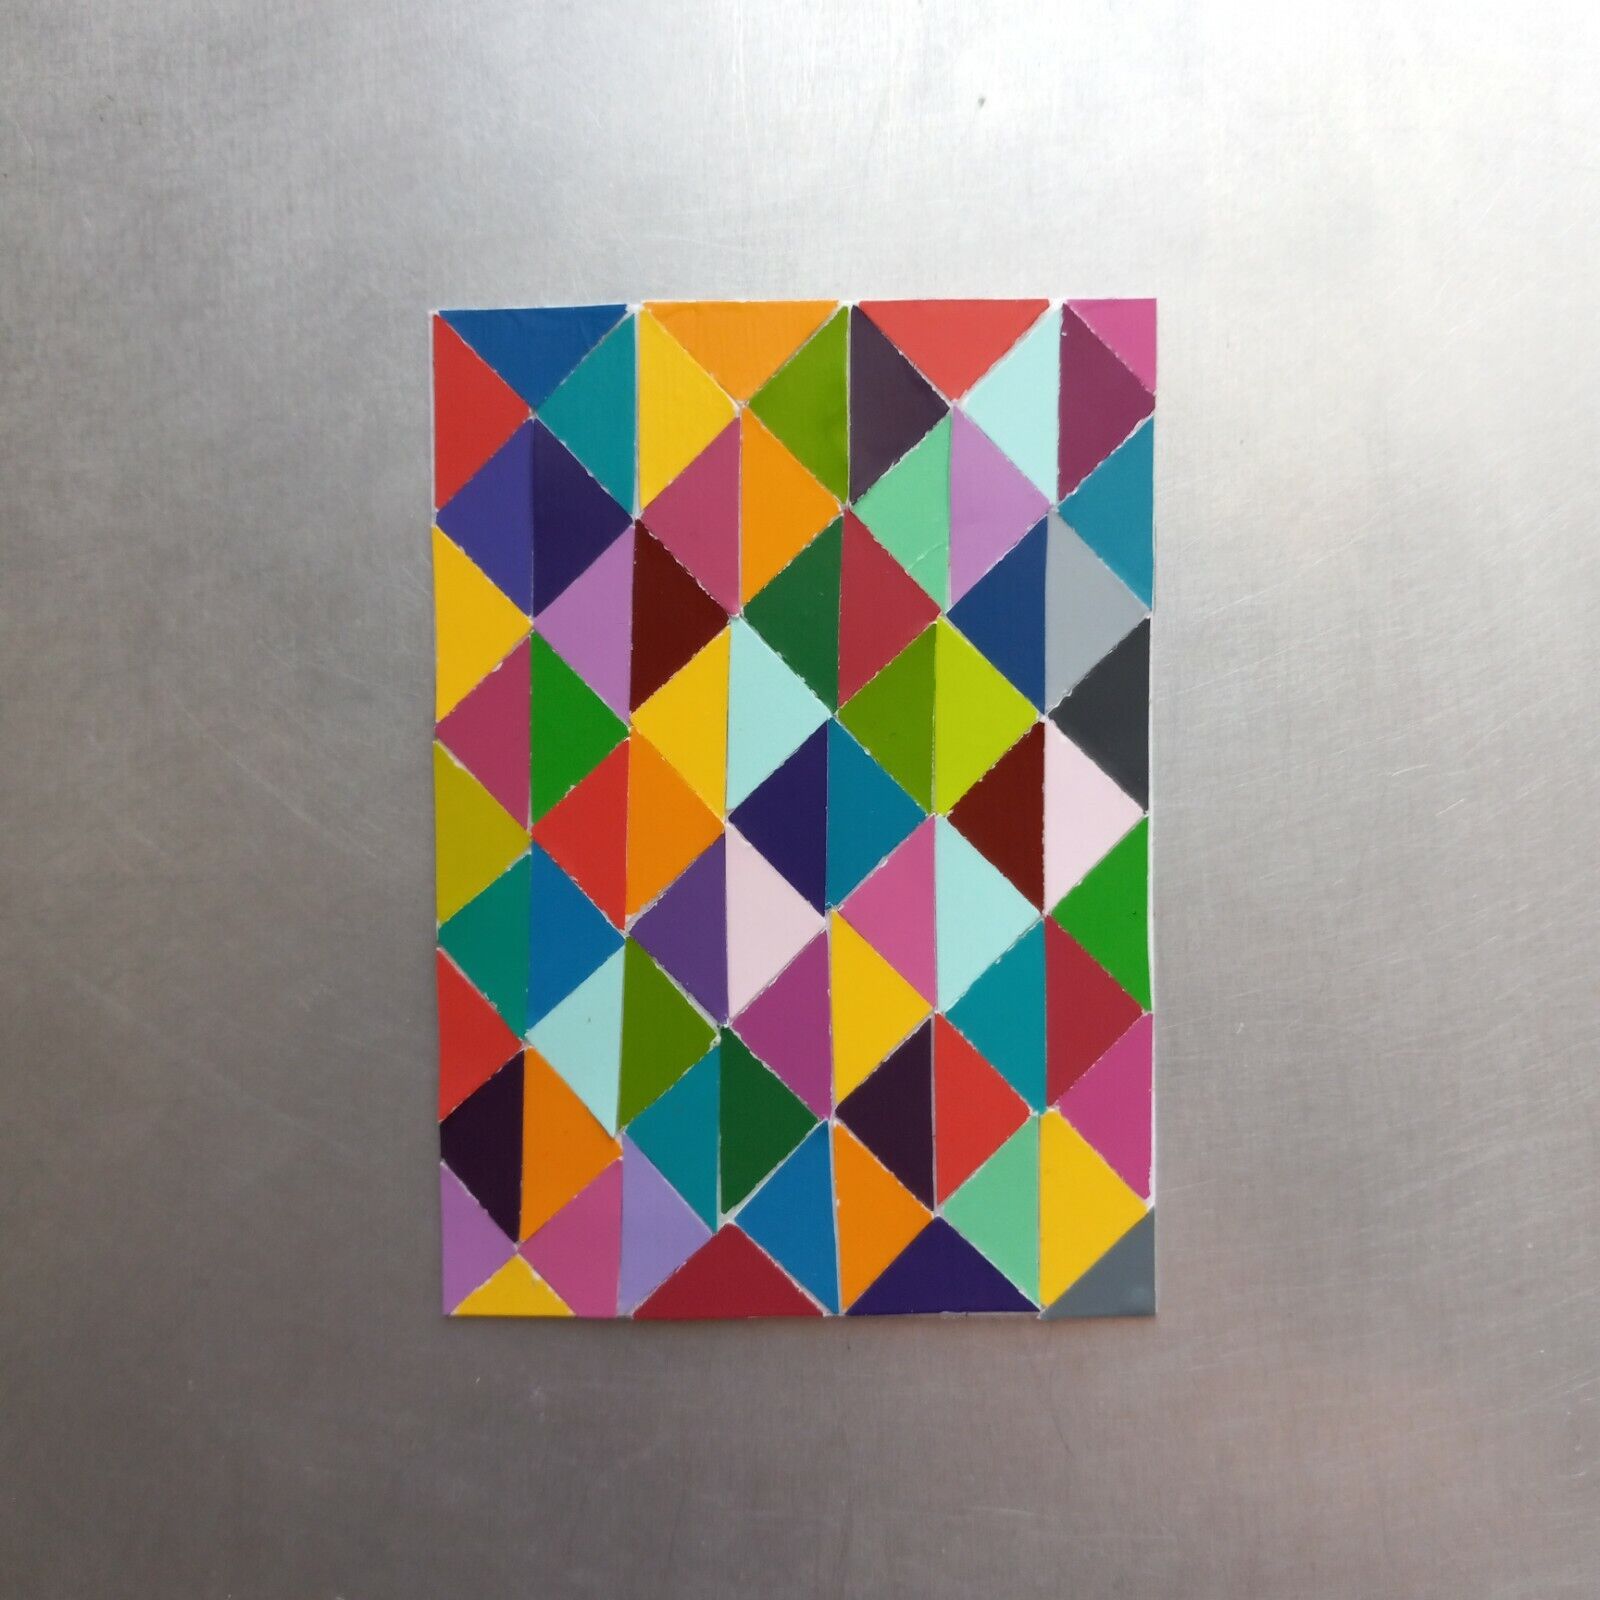 Super special price ORIGINAL Geometric ACEO Art Collage Abstract Triangles Ar Sales for sale Op